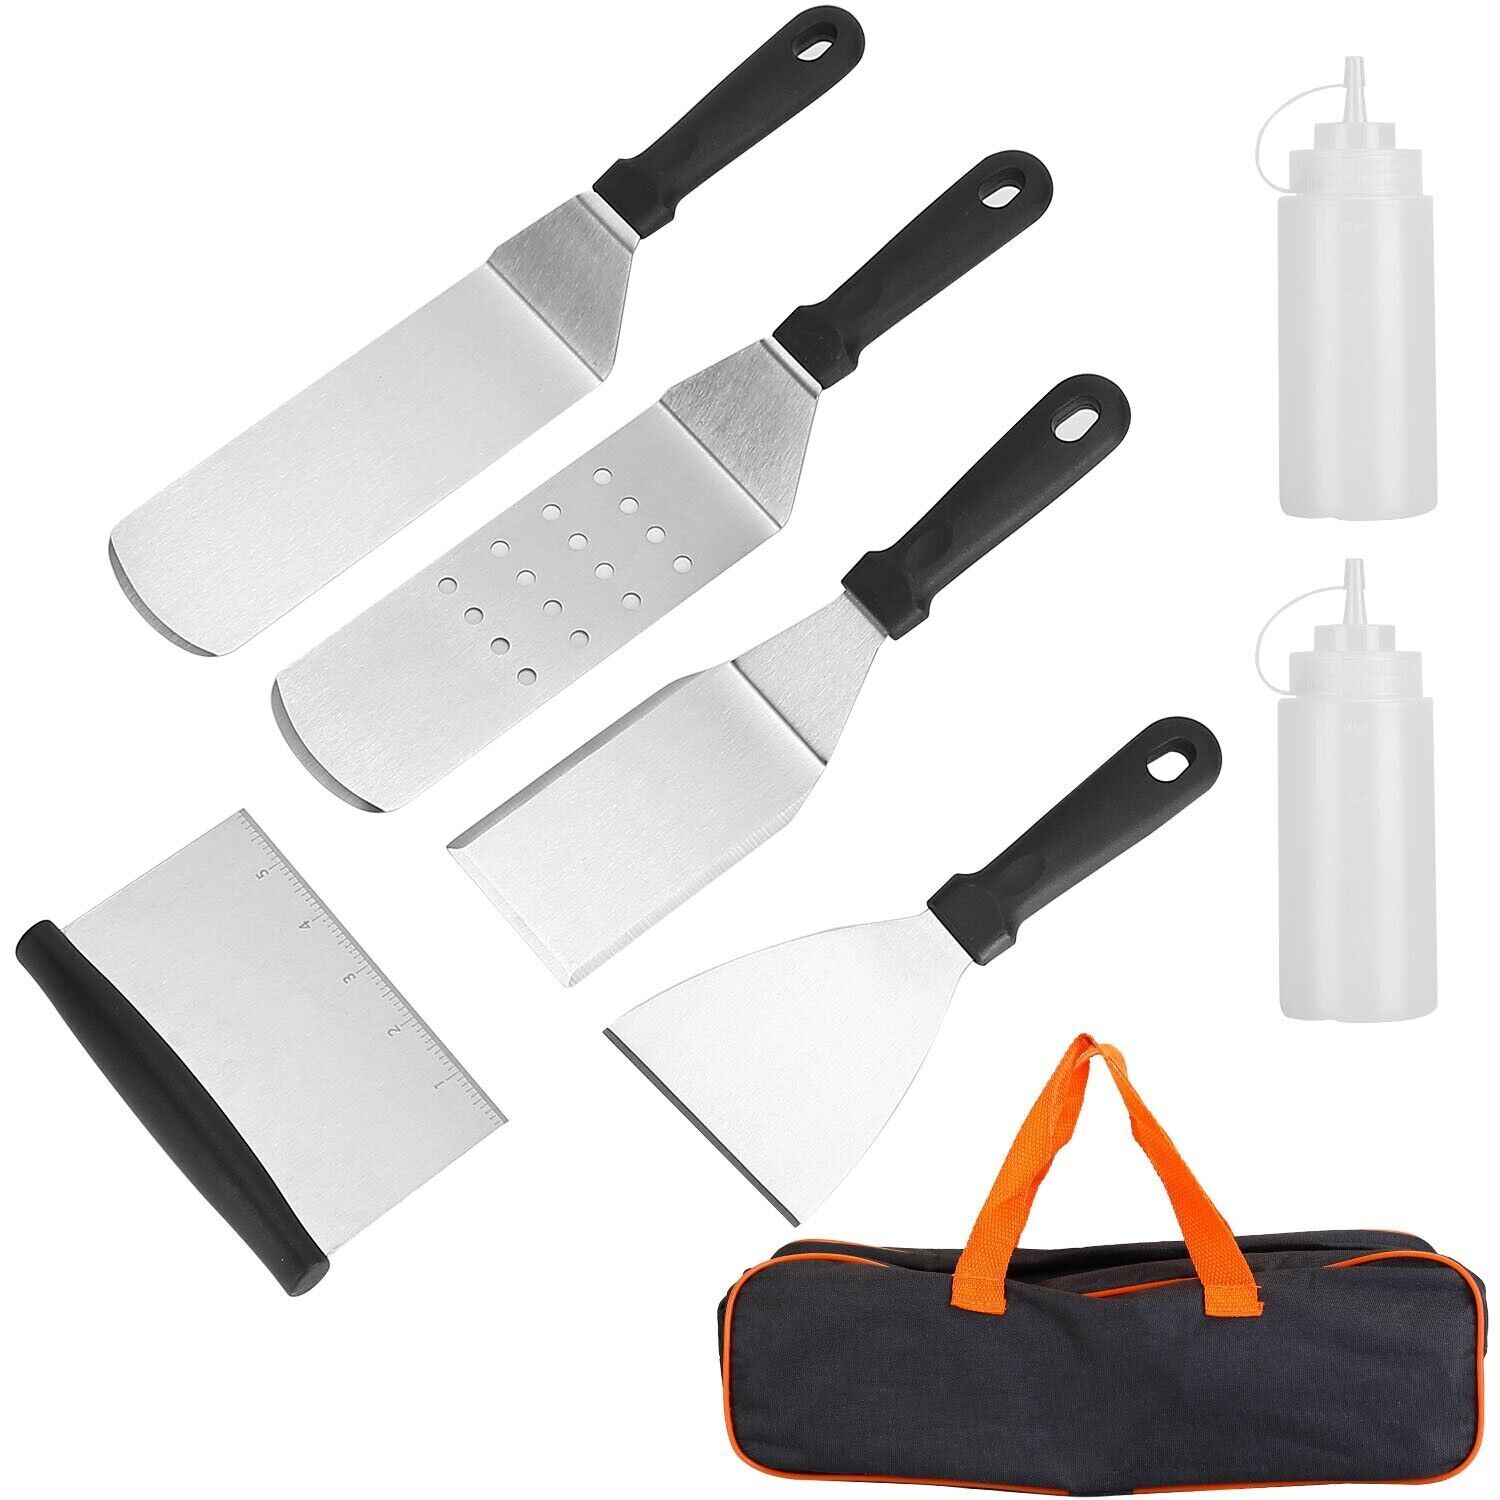 imountek 7Pcs Griddle Accessories Kit Outdoor Barbecue BBQ Griddle Spatulas Set Backyard